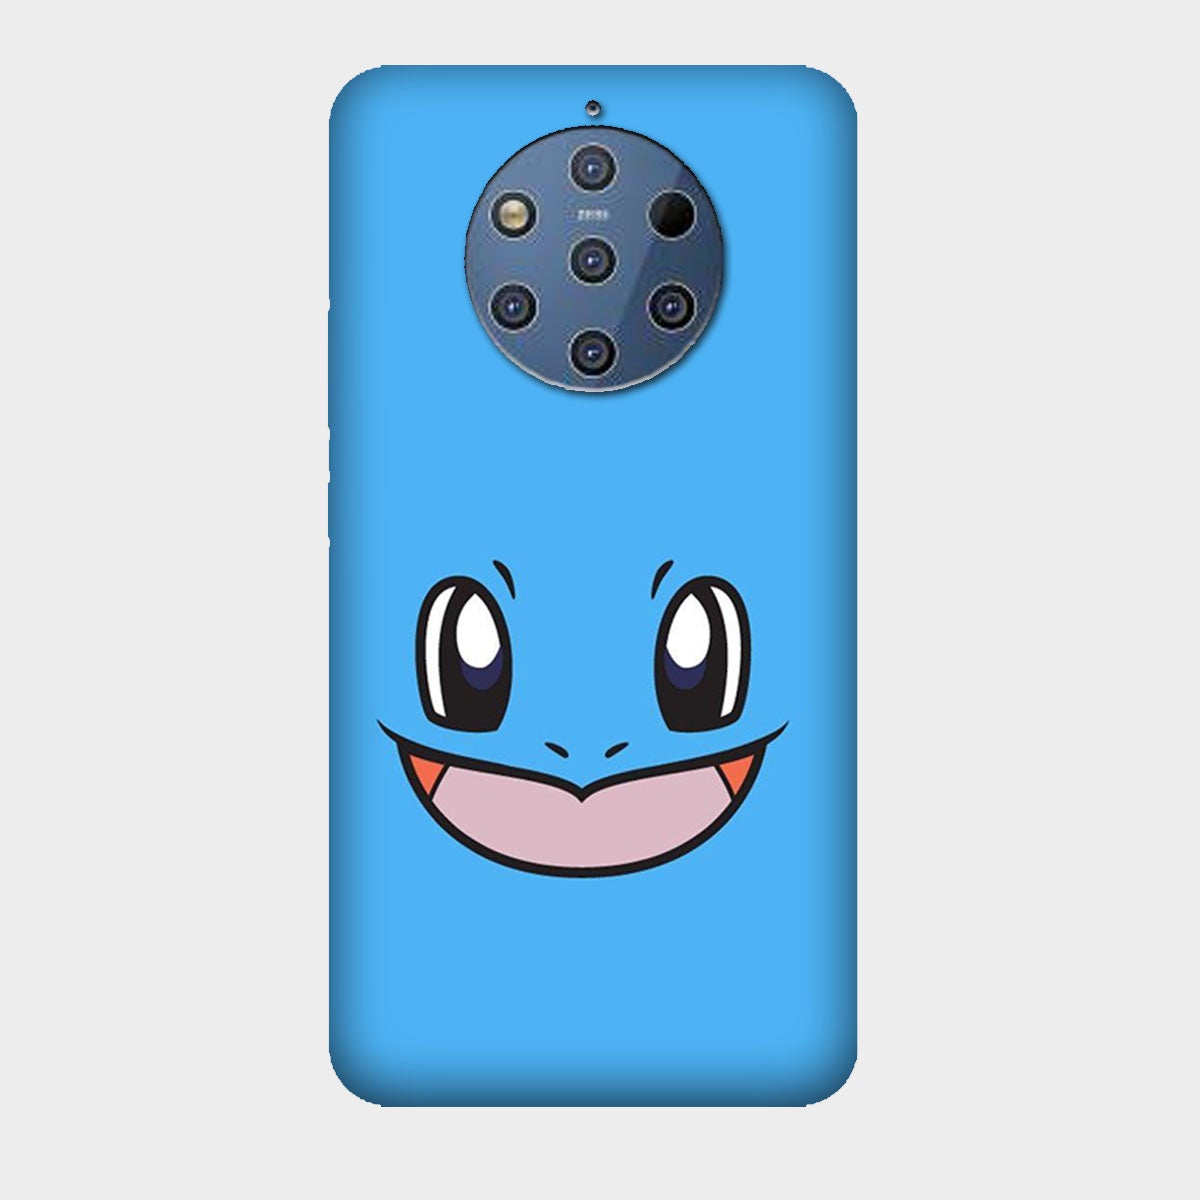 Squirtle - Pokemon - Mobile Phone Cover - Hard Case